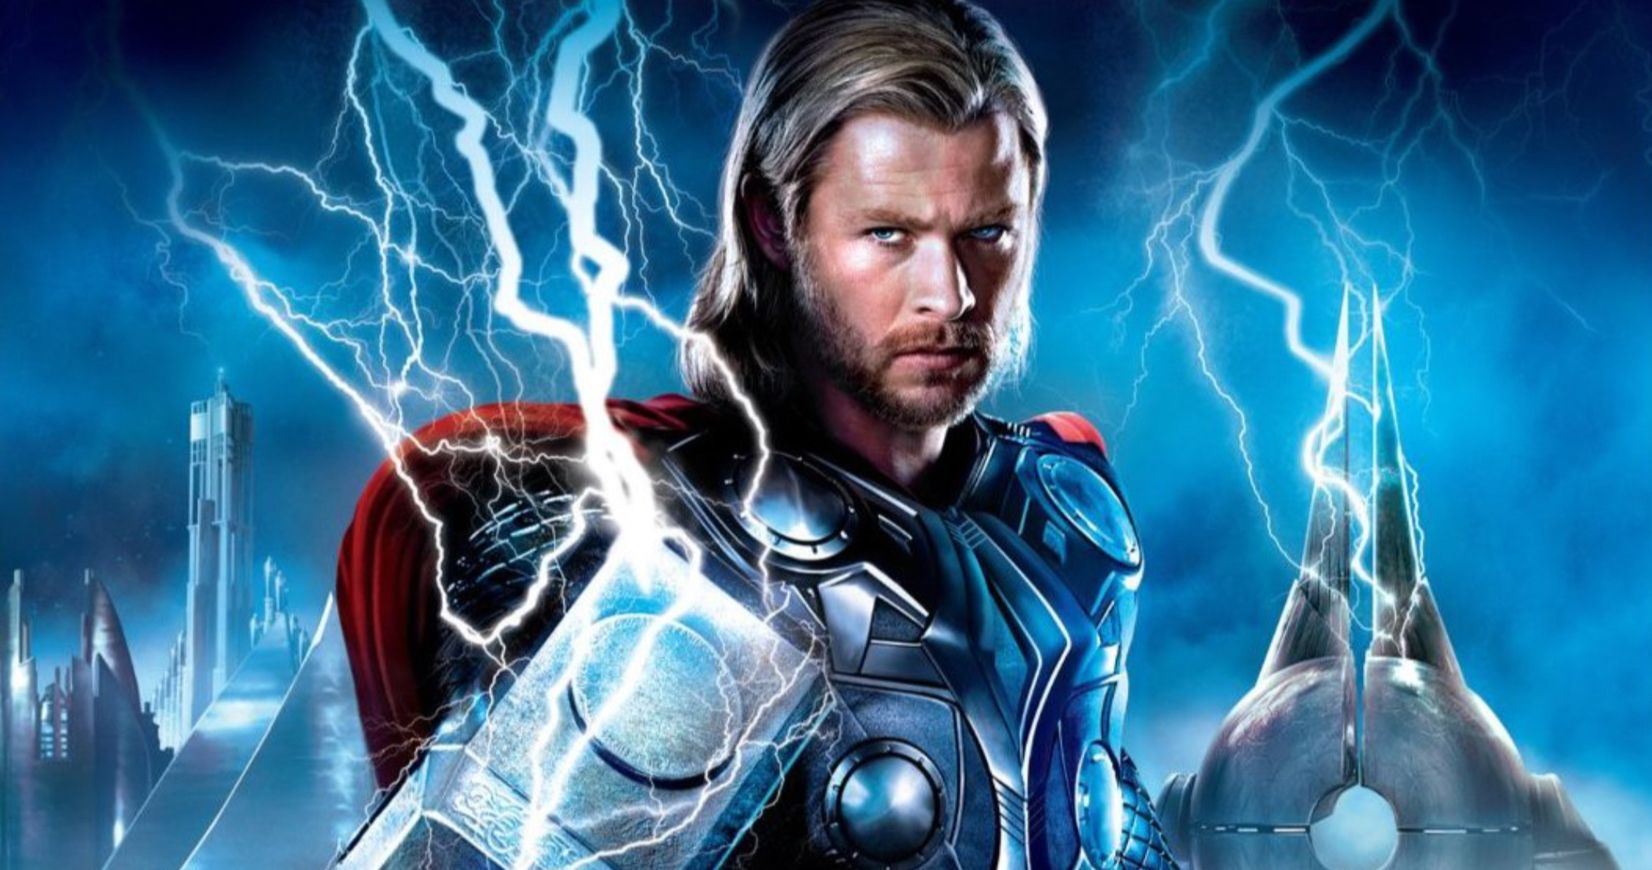 The Real Reason Thor Director Kenneth Branagh Didn't Return for the Sequels